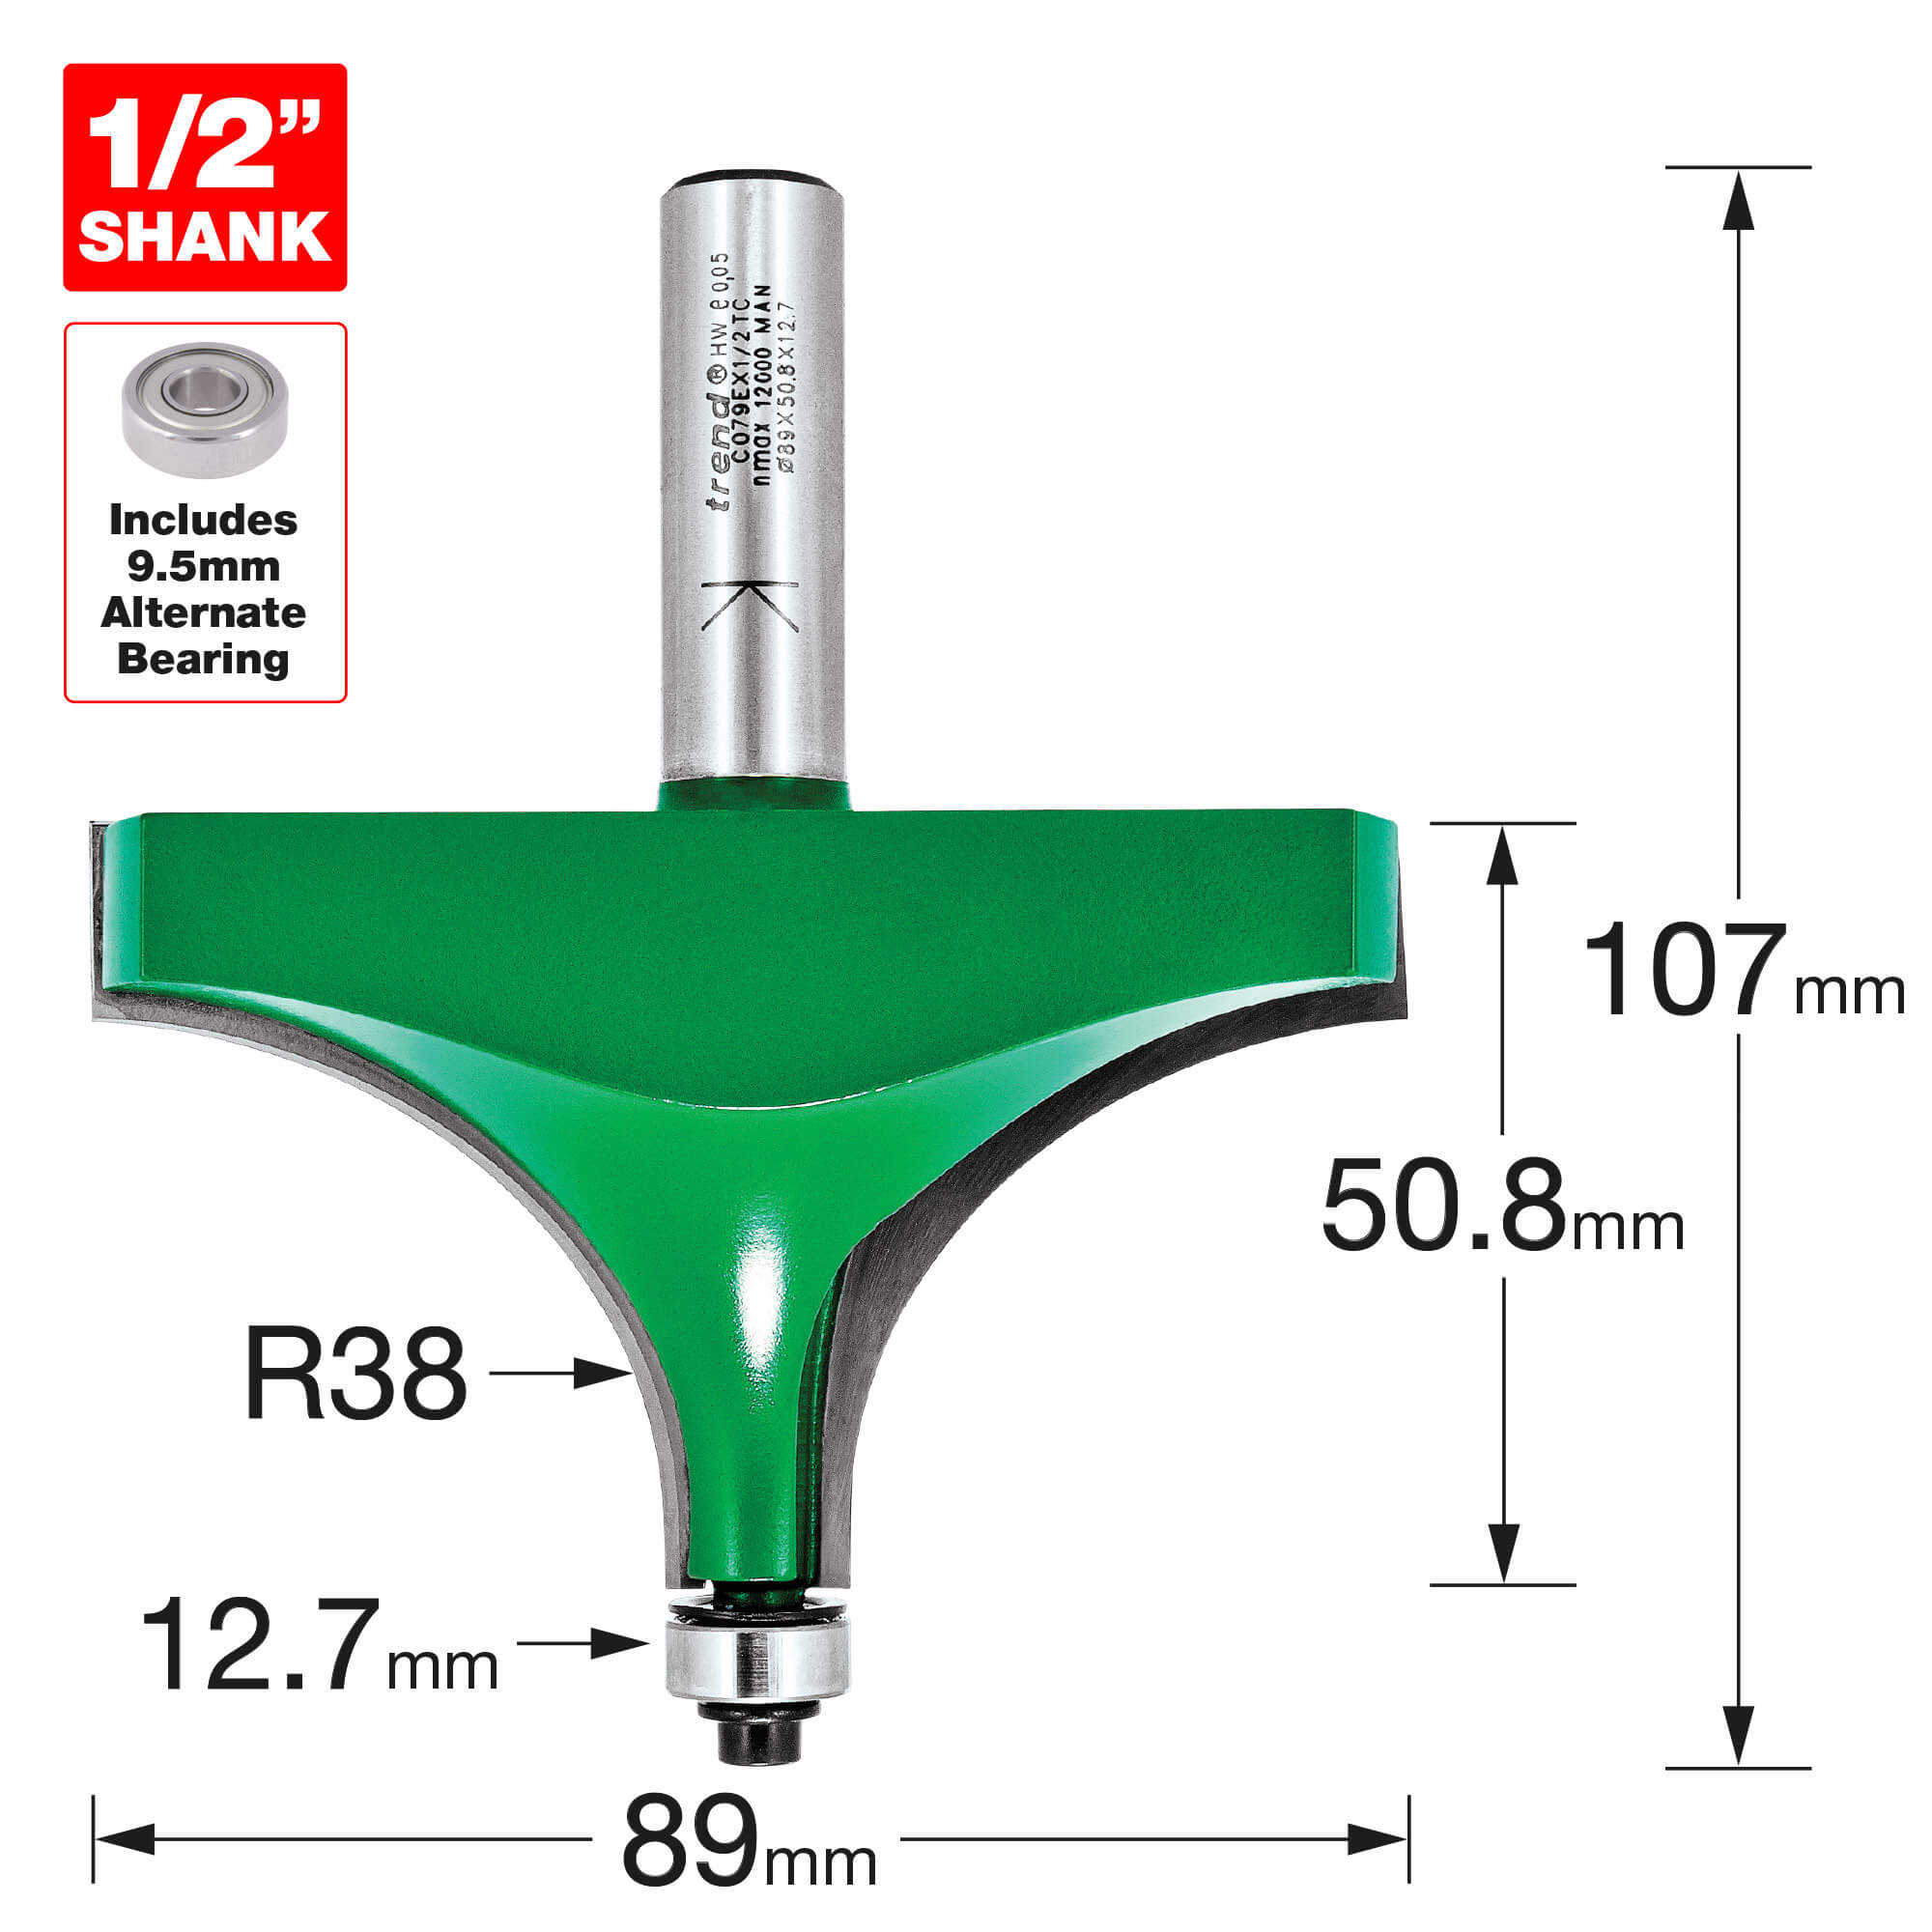 Image of Trend CraftPro Bearing Guided Round Over and Ovolo Router Cutter 89mm 50.8MM 1/2"